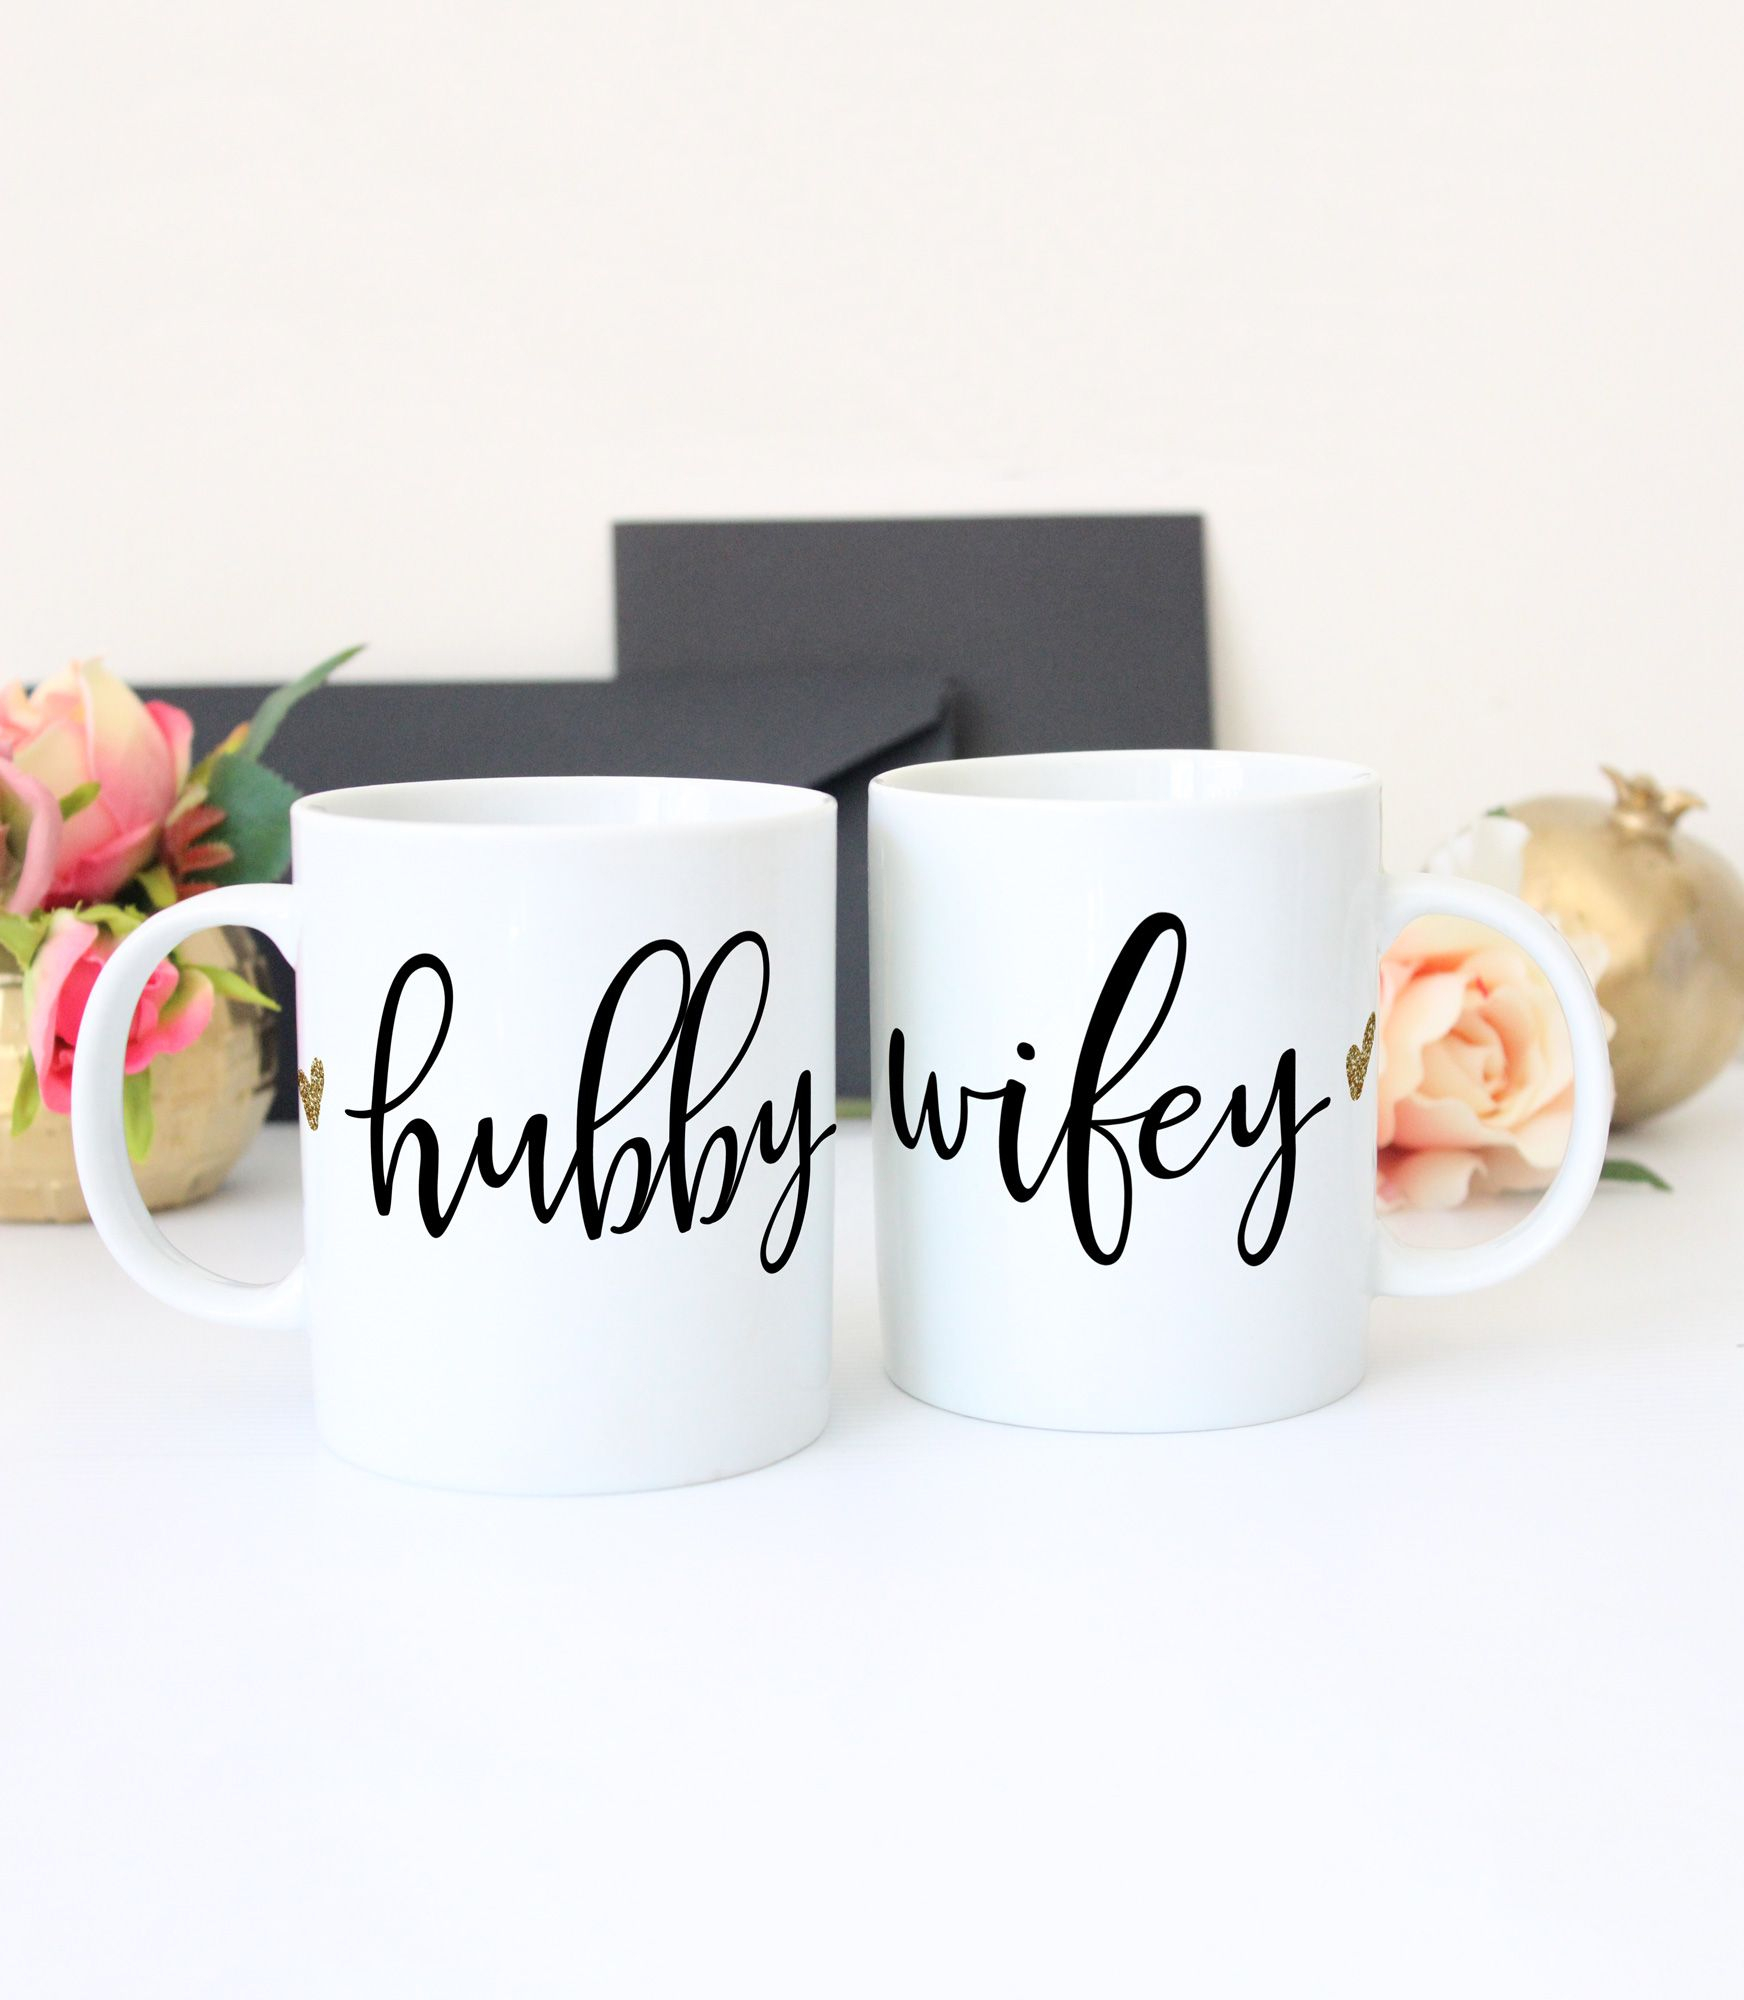 10 Most Recommended Valentines Day Ideas For Newlyweds valentines day gift ideas matching mugs for couples great ideas 2022